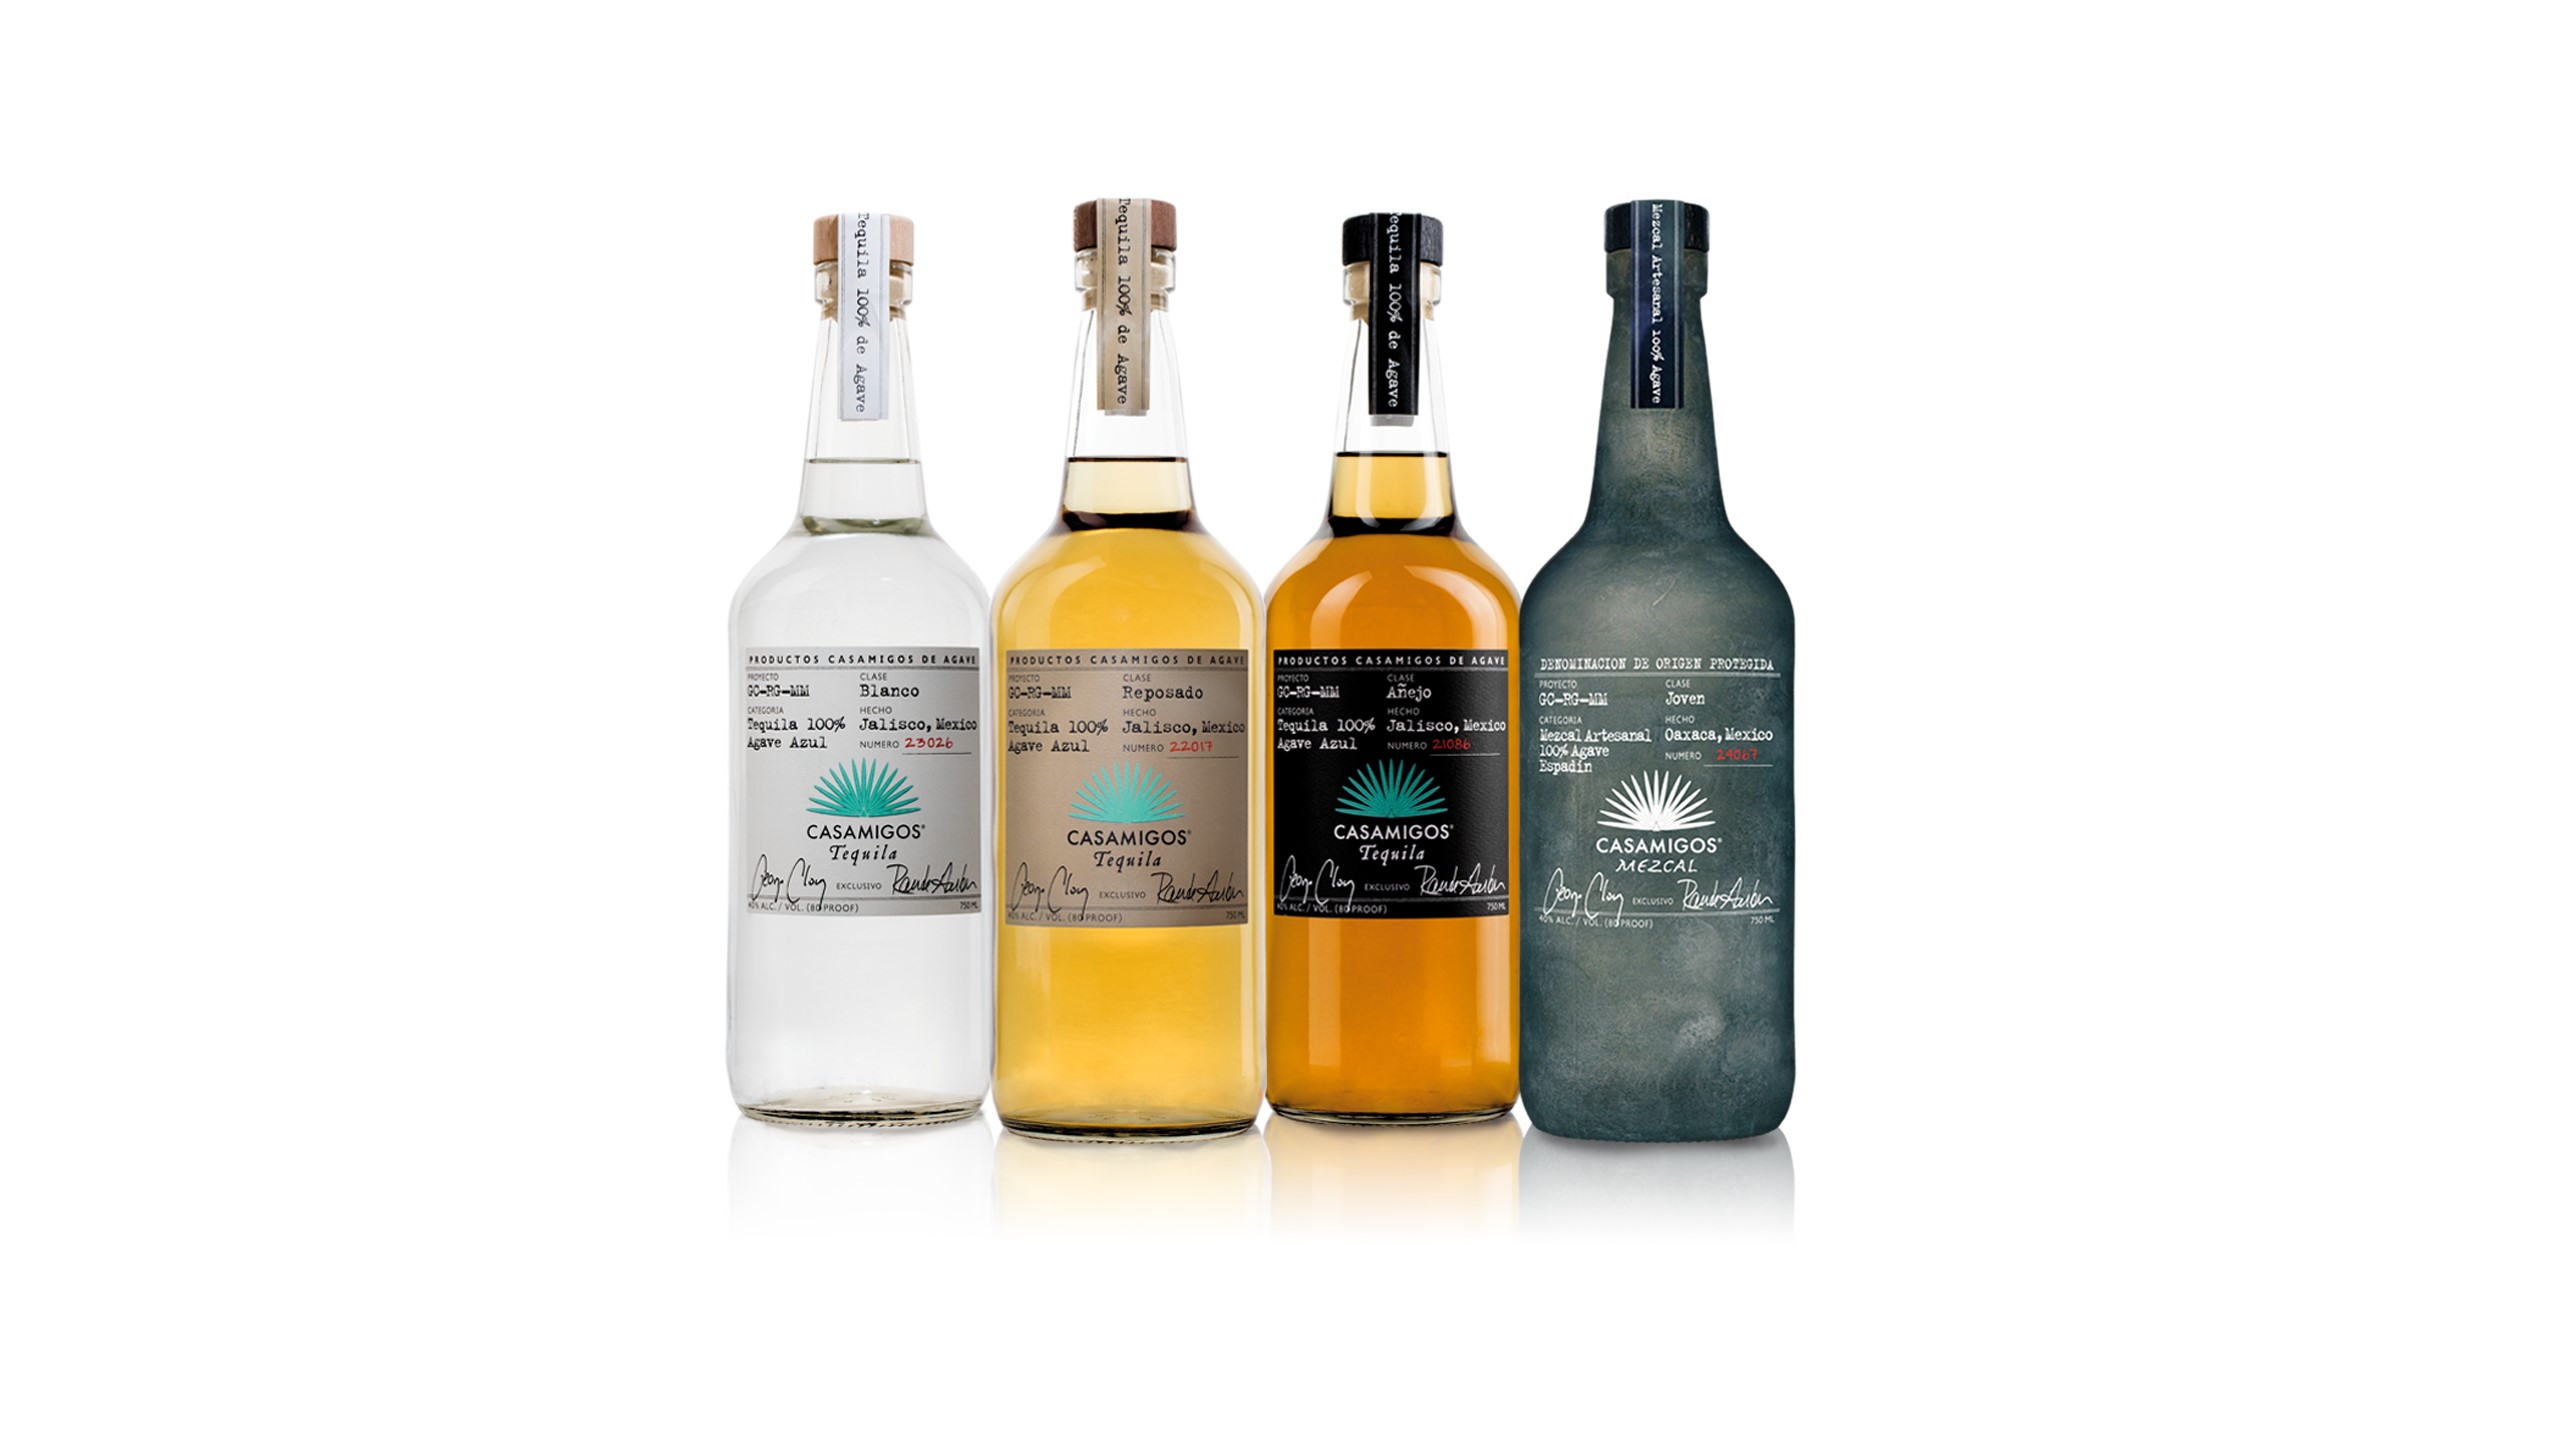 Diageo Adds Casamigos Tequila And Mezcal To Reserve Portfolio In